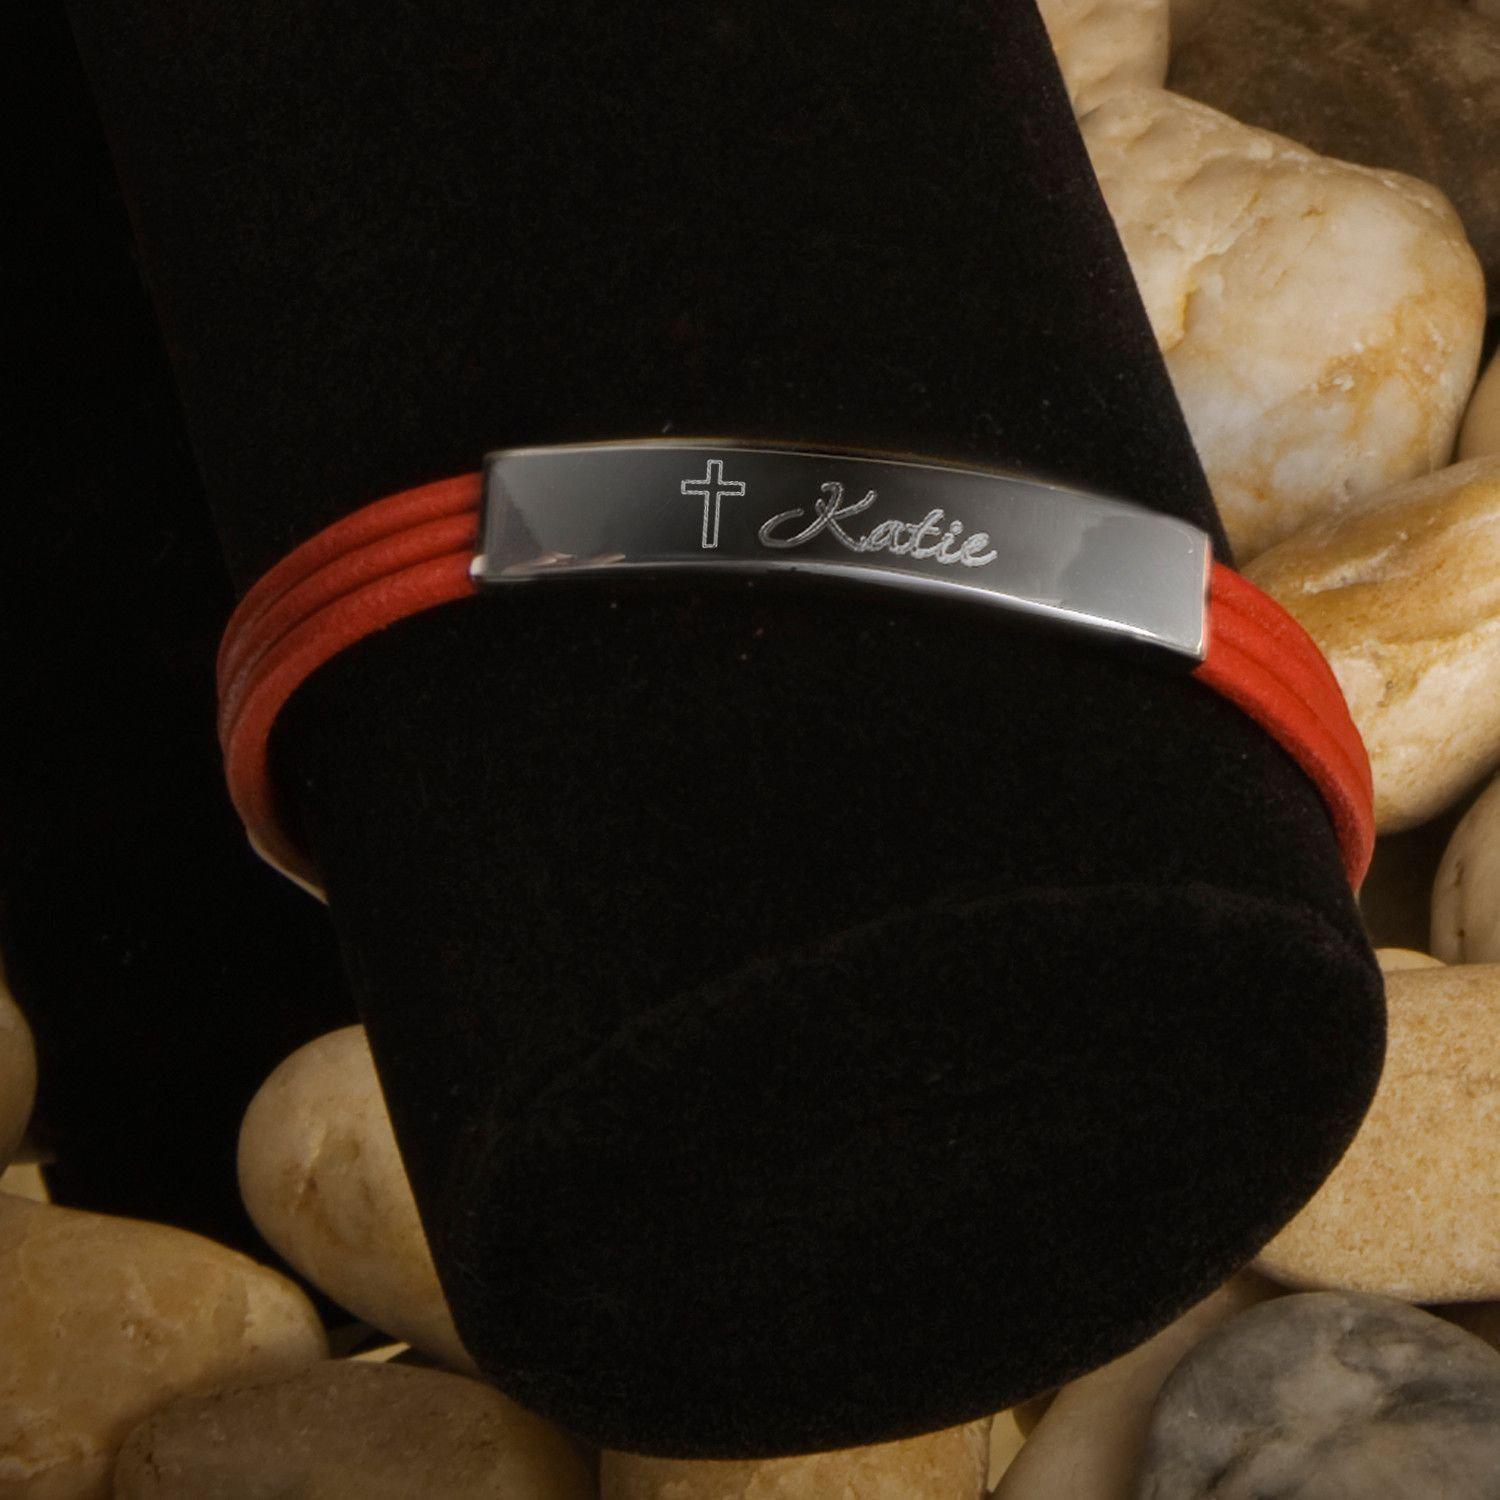 Inspirational Leather Bracelets with Engraved Cross